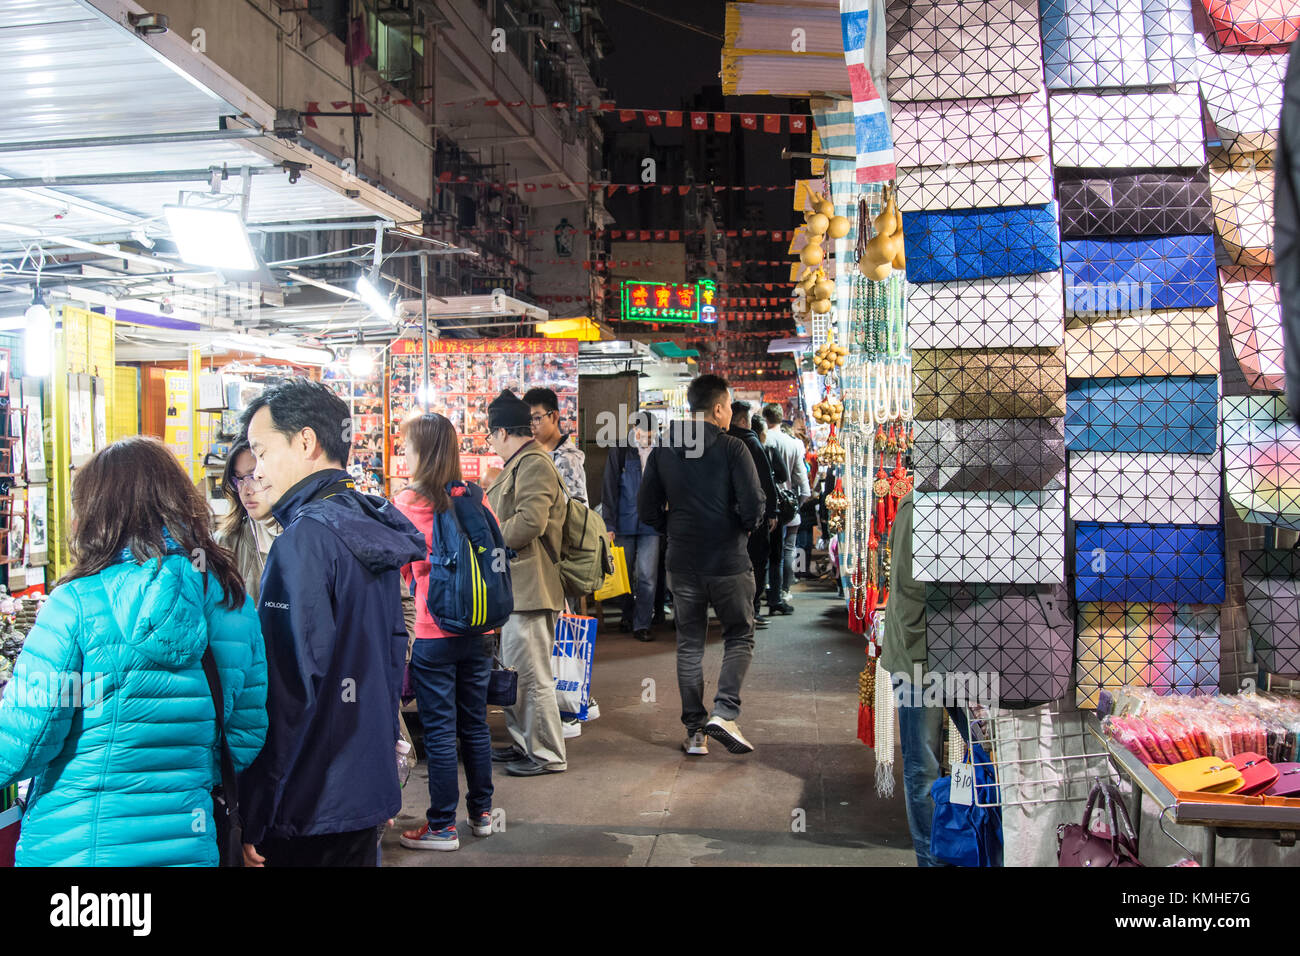 A view of the people walking in Temple street night market in Hong Kong Stock Photo